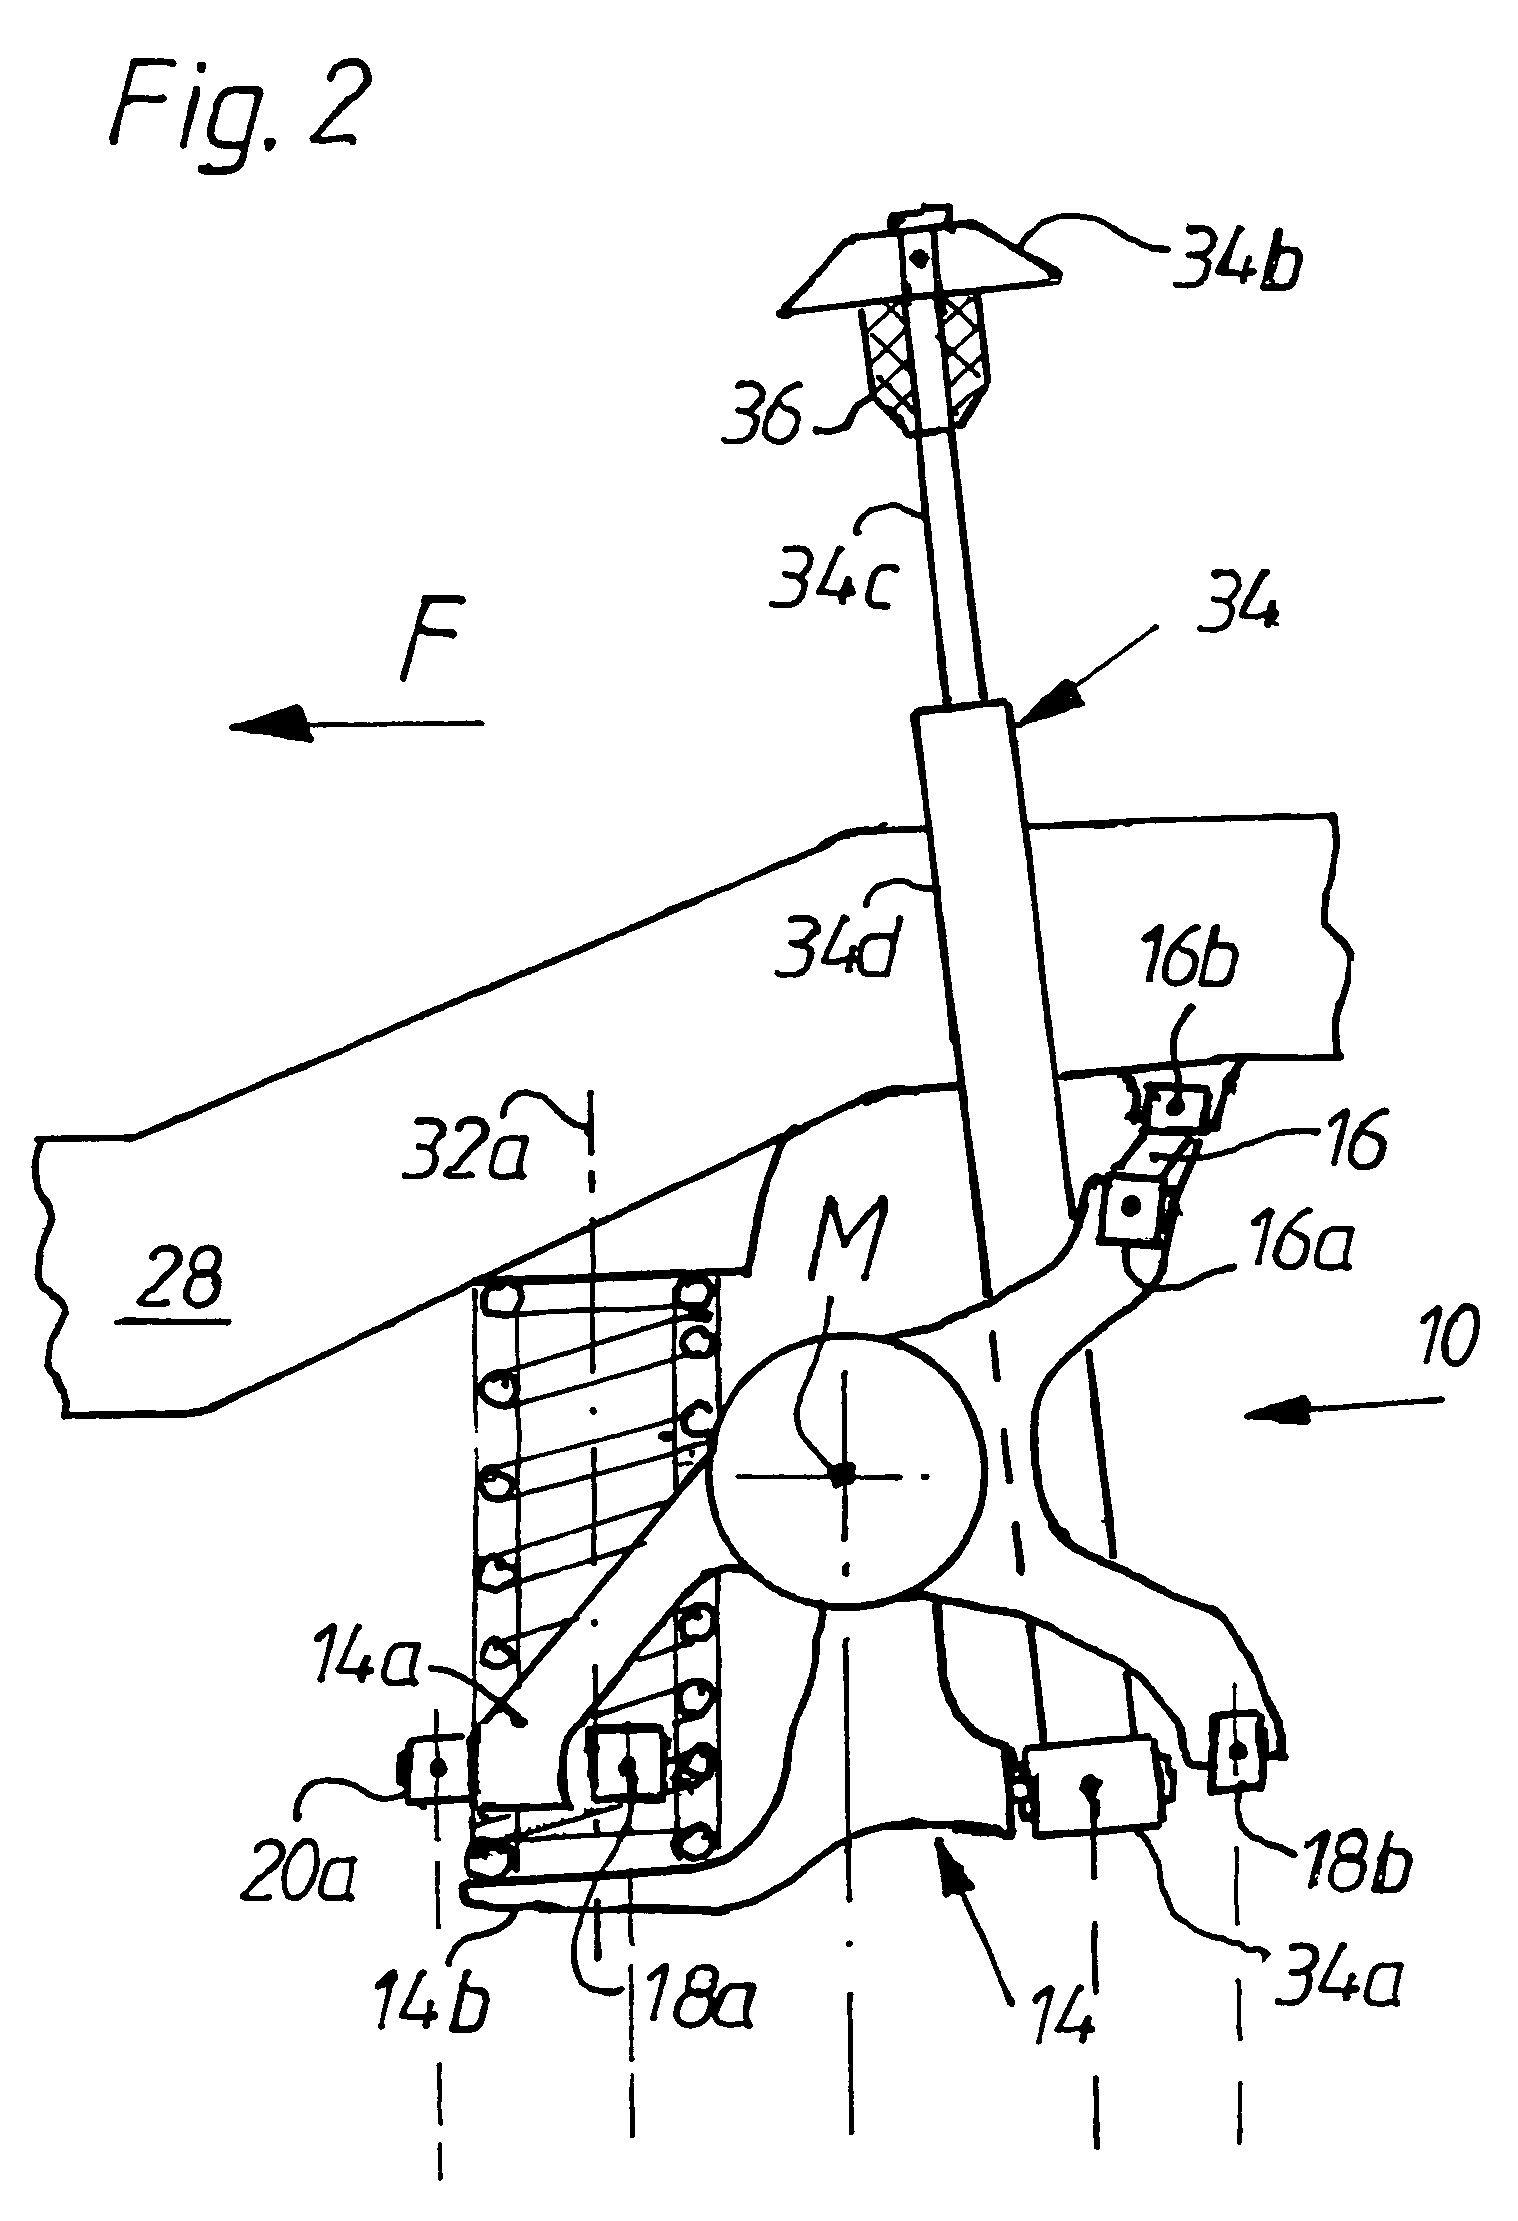 Independent wheel suspension for the rear wheels of motor vehicles